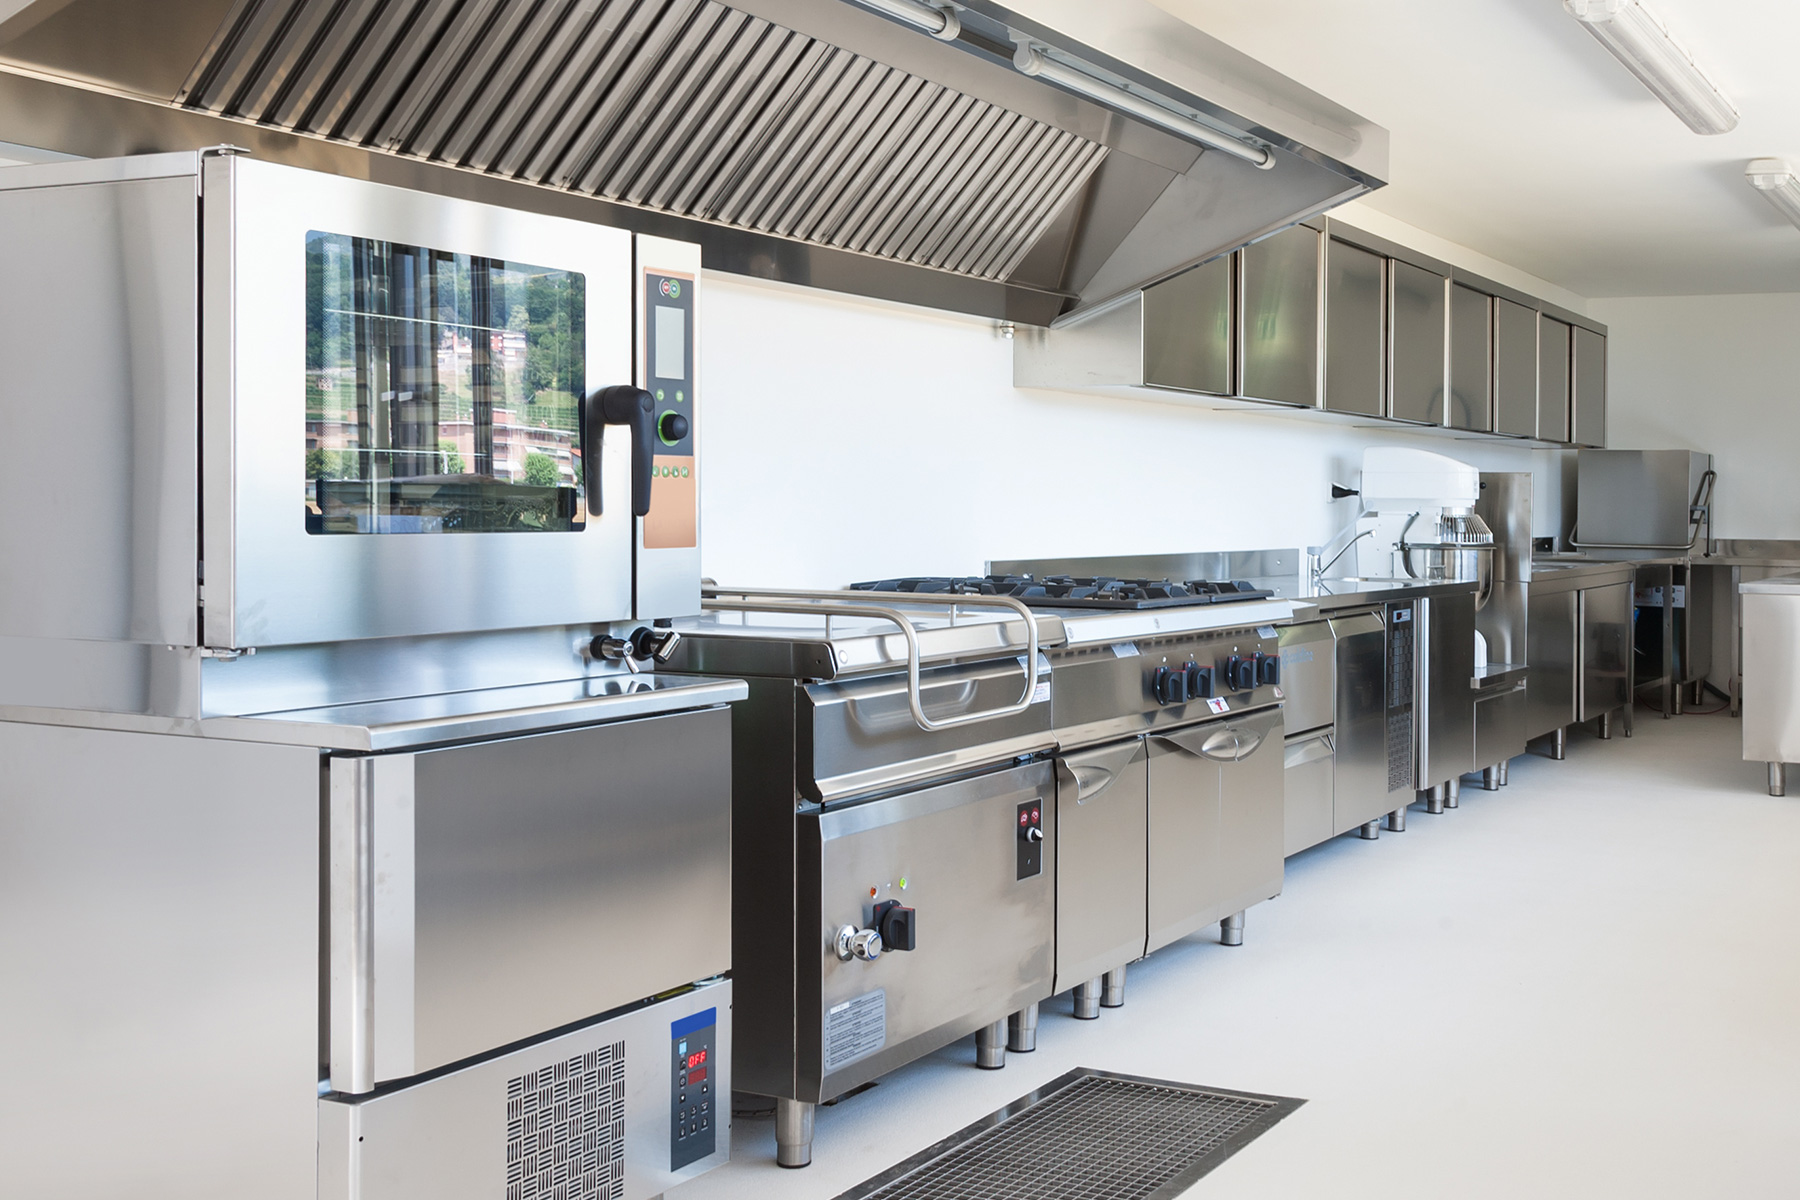 20 Ways to Set Up a Commercial Kitchen